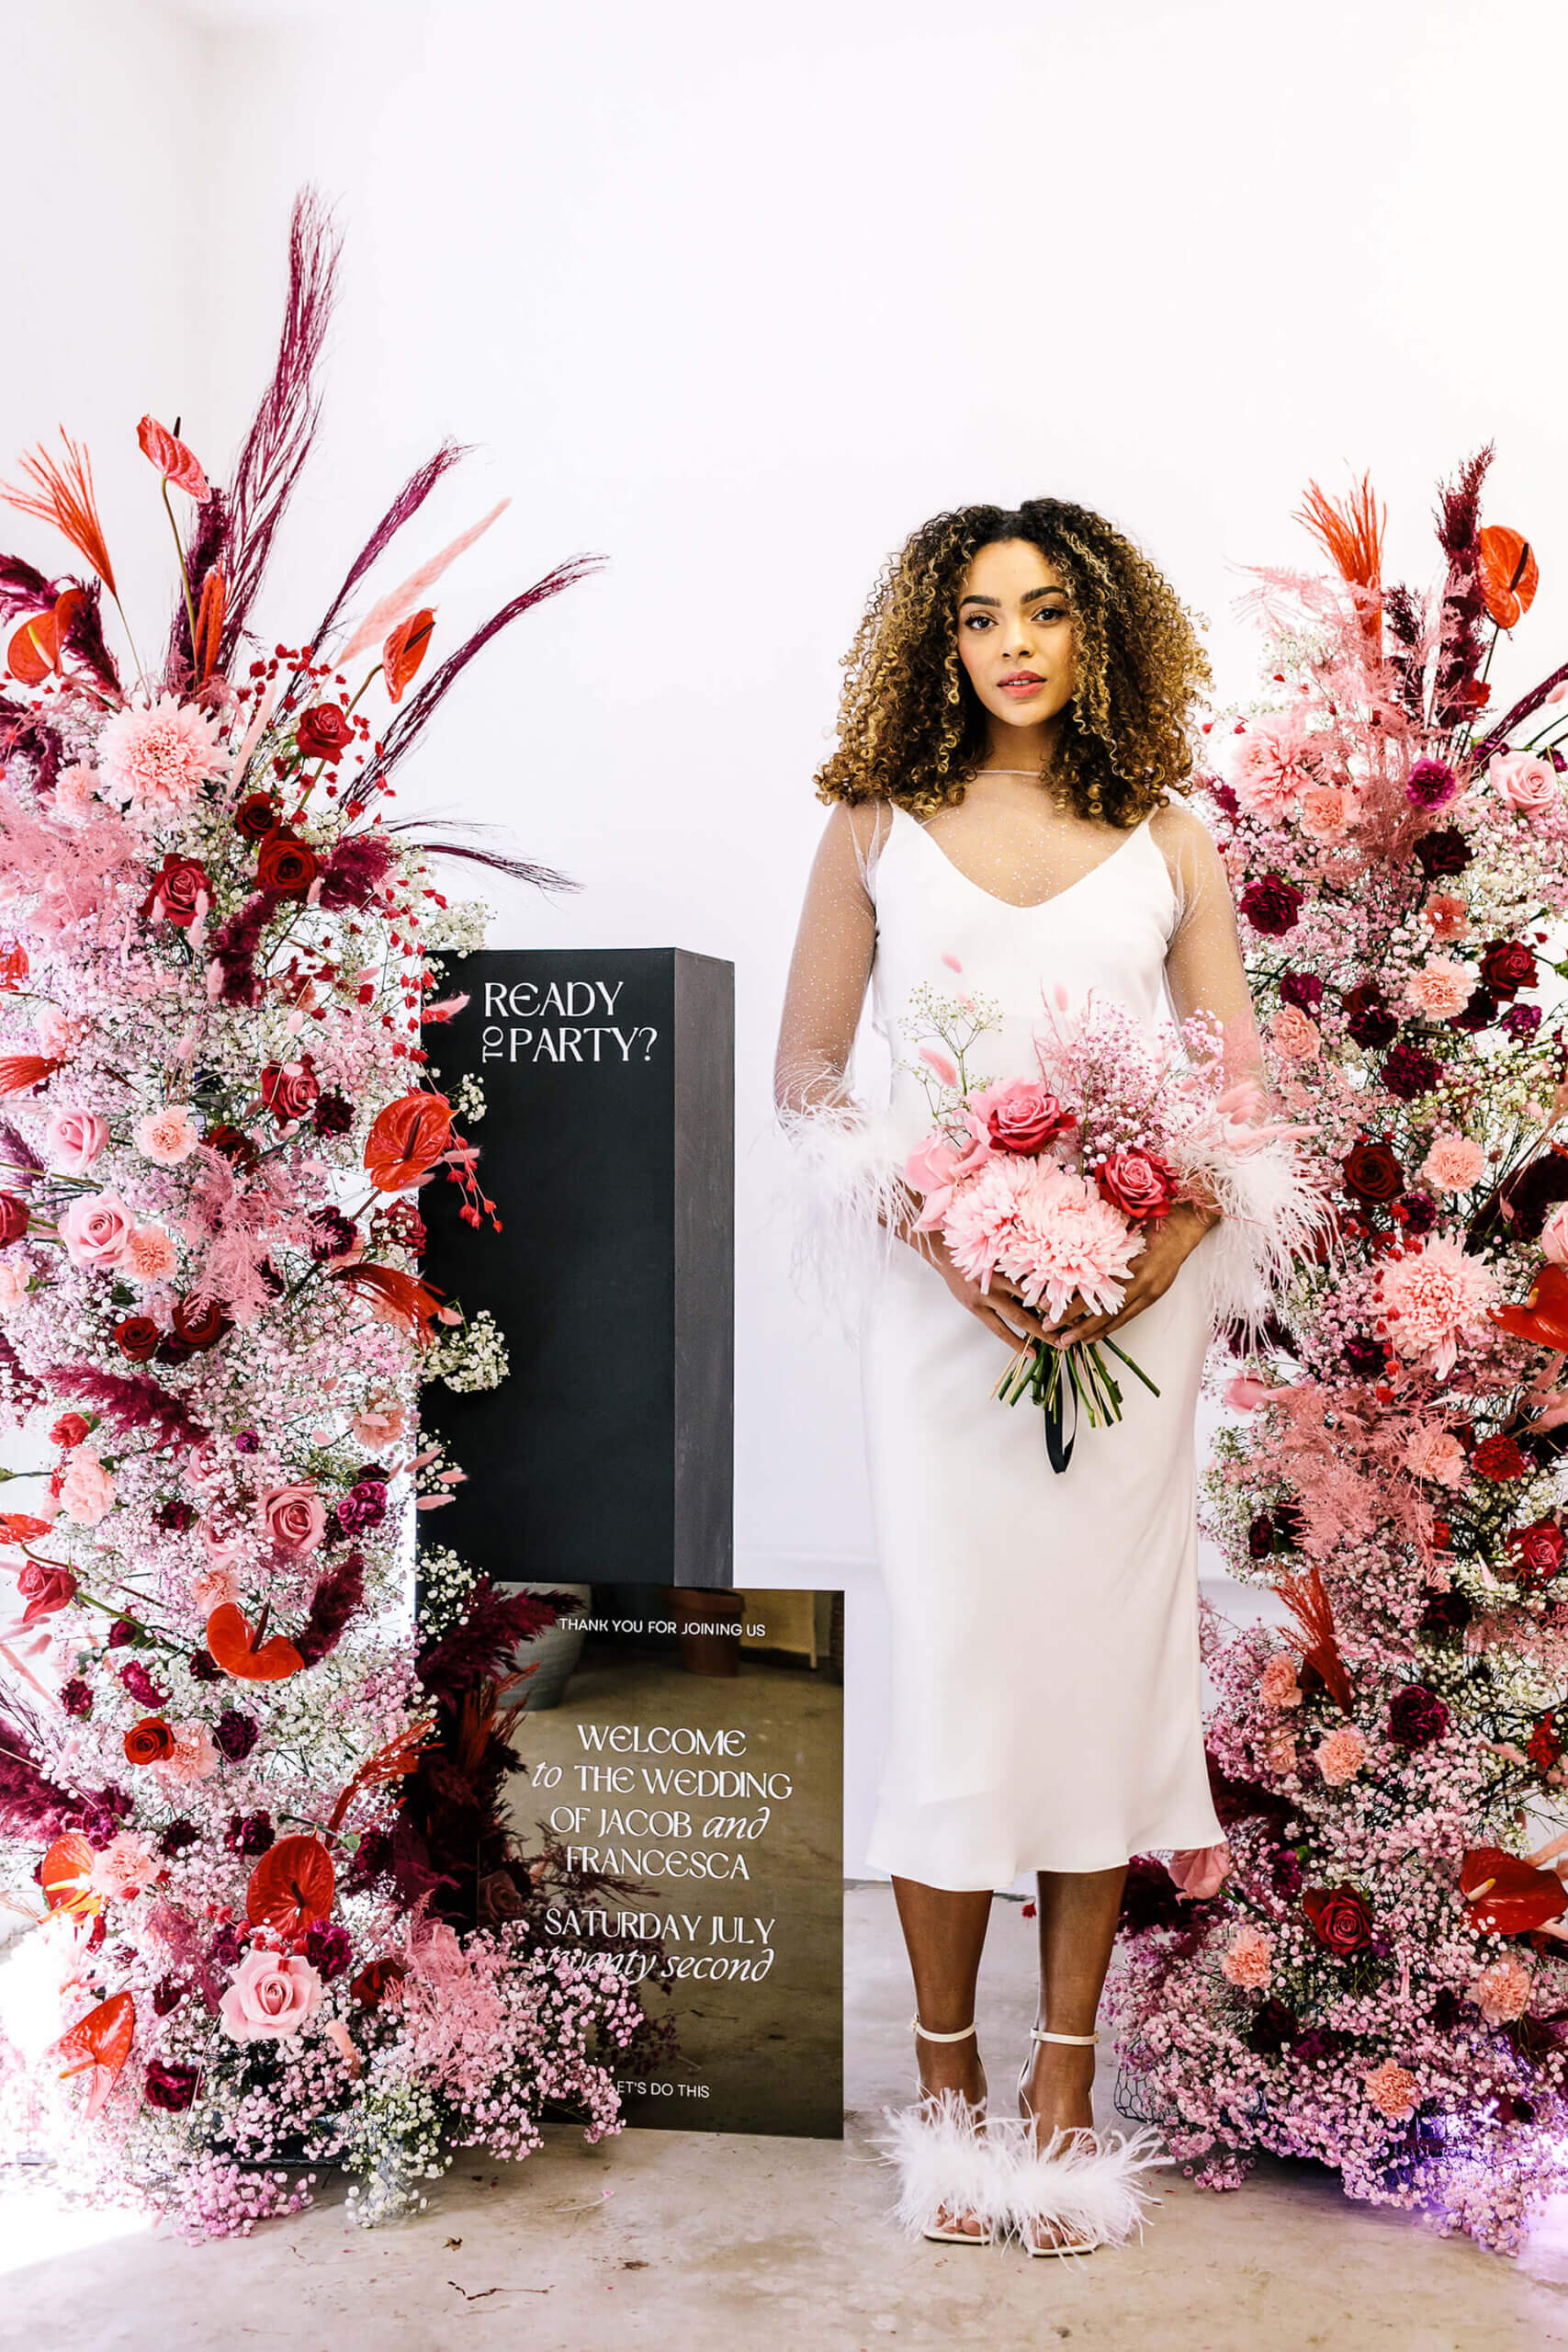 A young woman with curly brown hair wearing a wedding dress and holding a pink bouquet is starring into the camera. On either side of her is a tall sculptural, pink floral display. To her right is an engraved sign which reads 'ready to party?'